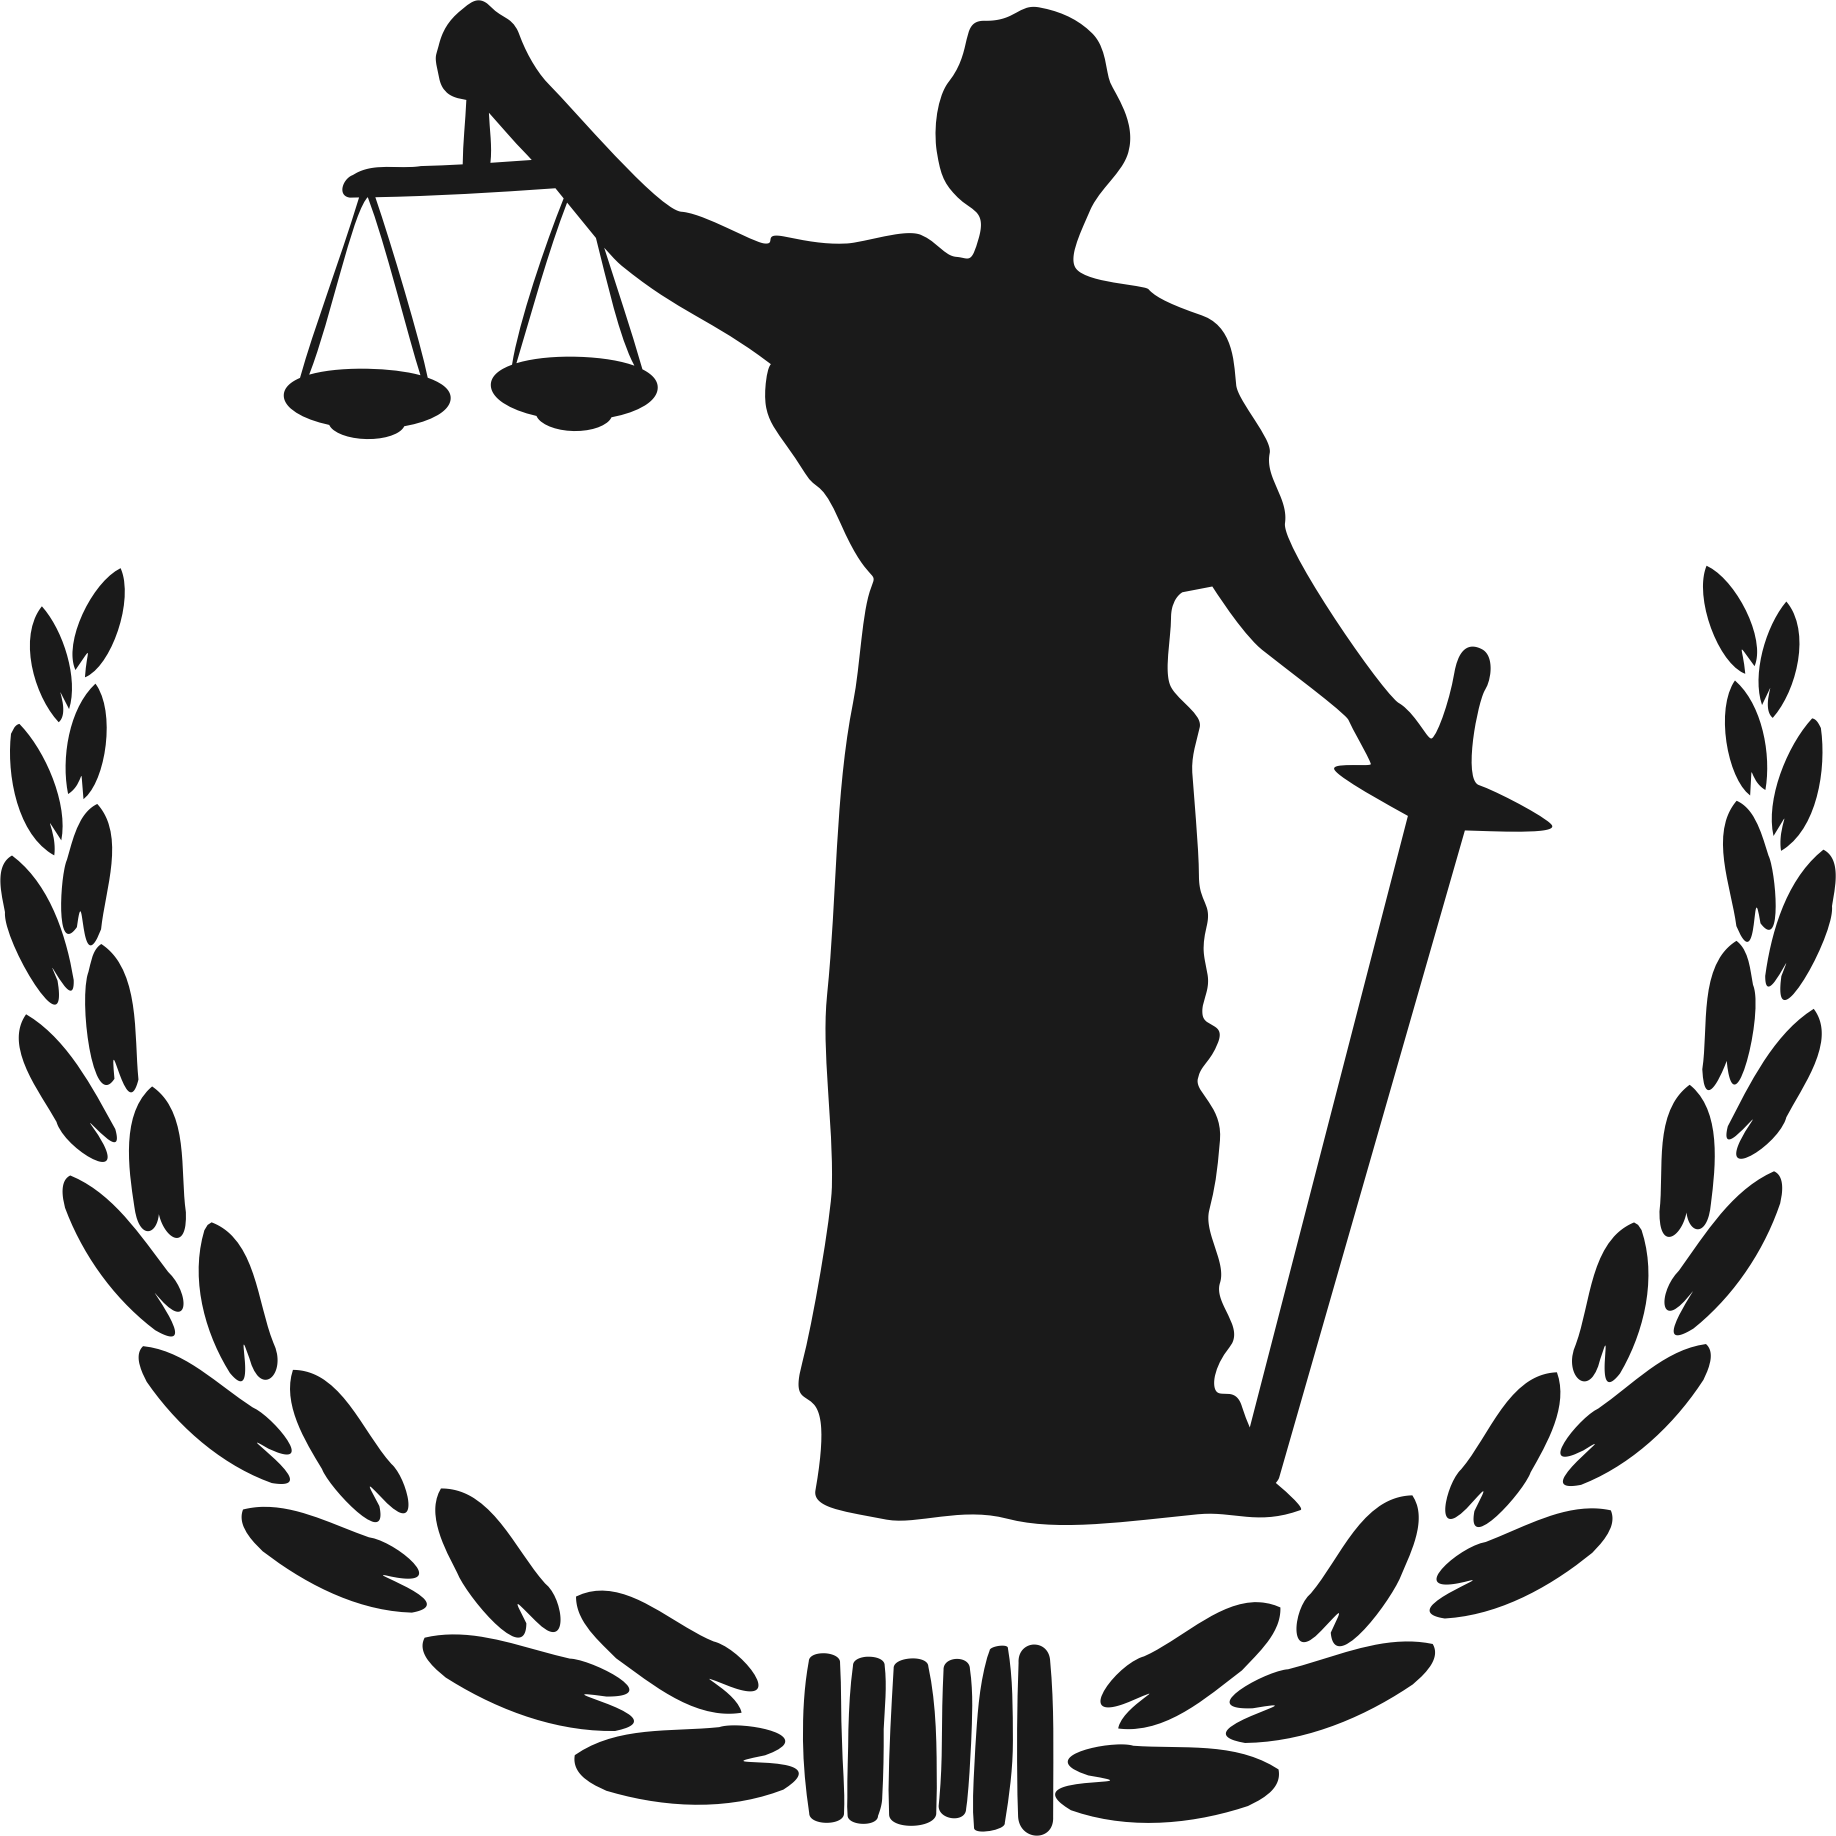 Where now for the. Legal clipart justice